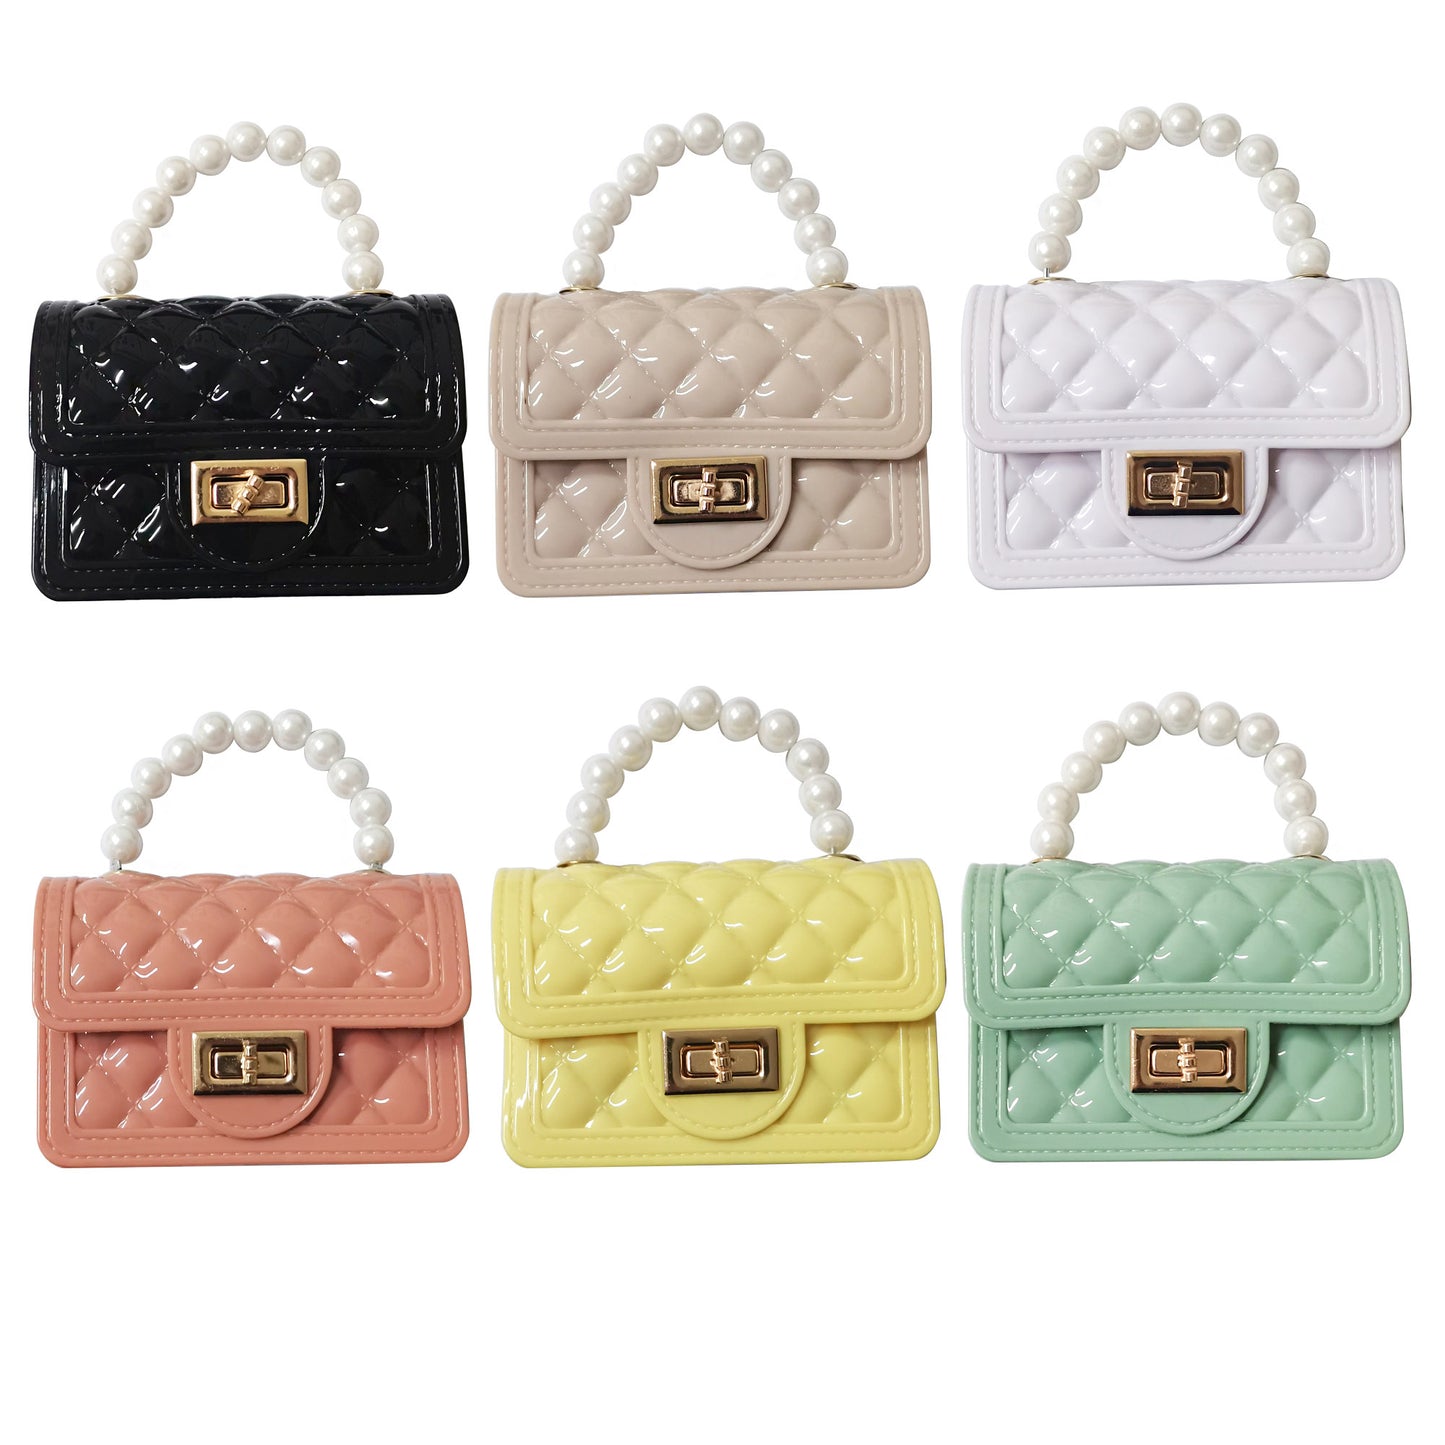 QUILTED MINI JELLY PURSE 3113-37 (12PC)